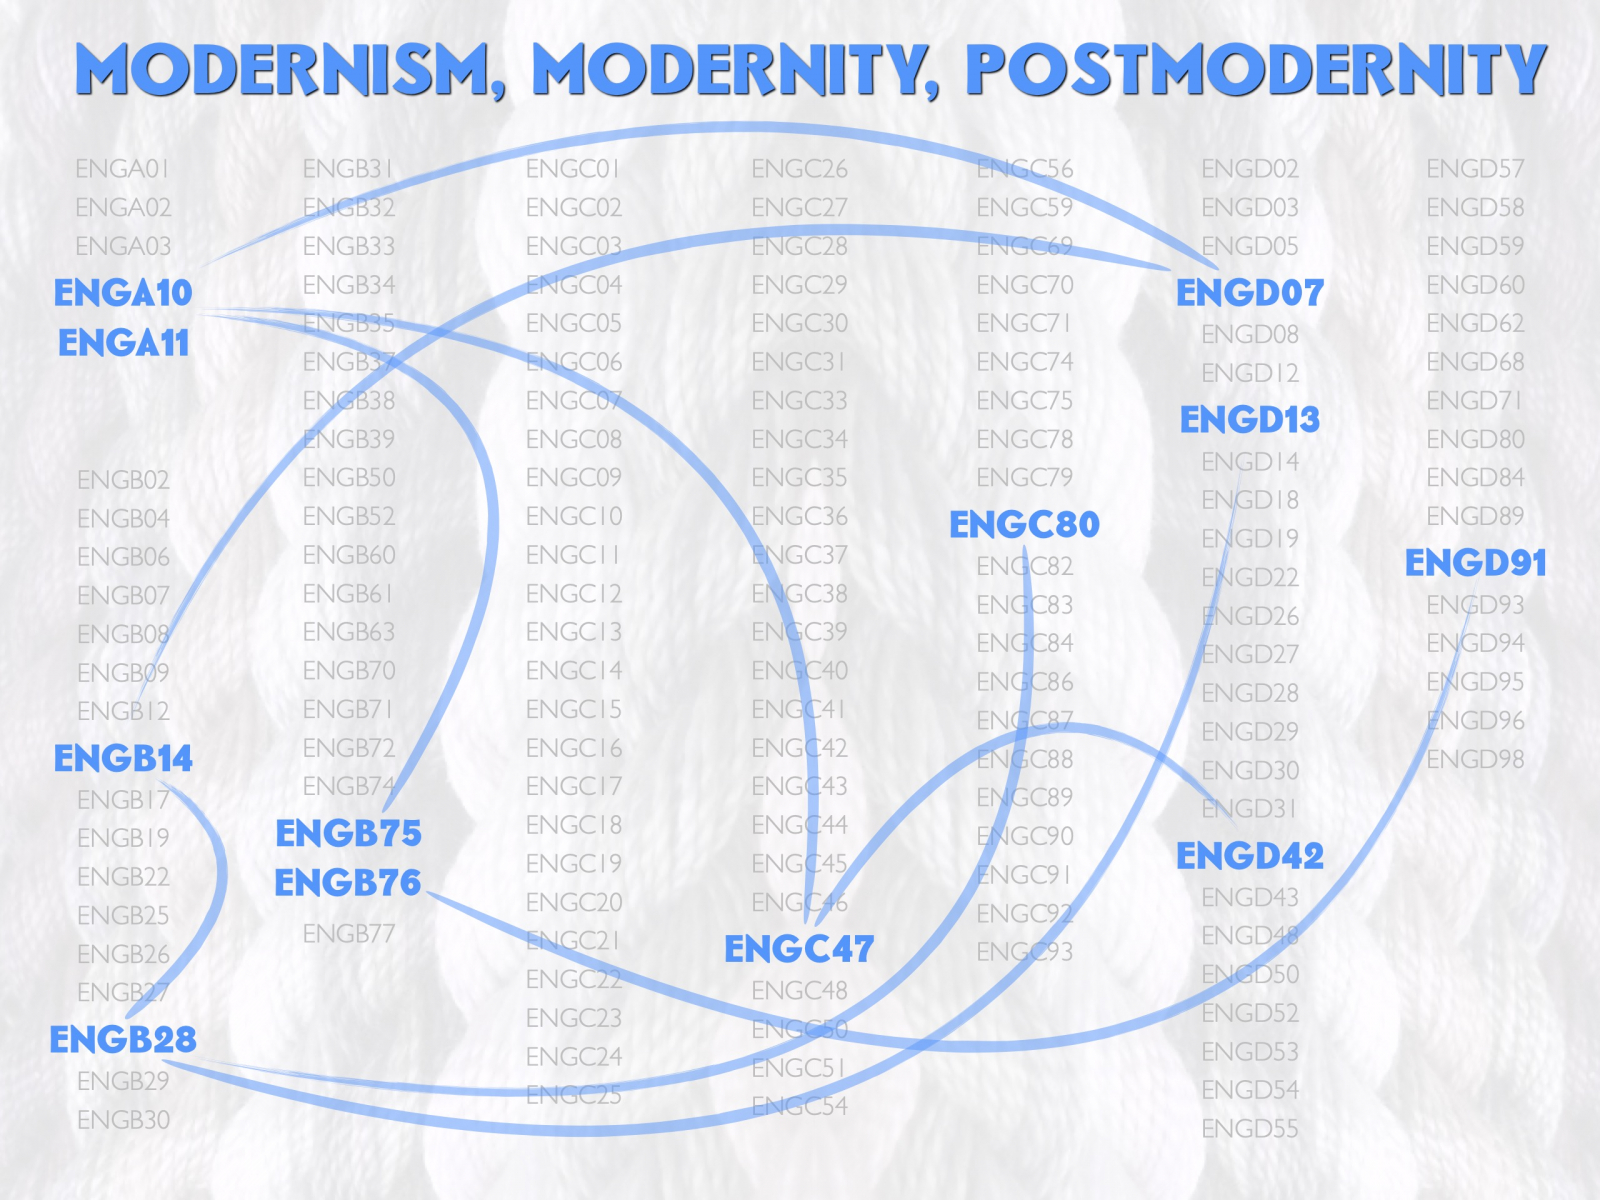 Modernism, Modernity, and Postmodernity road map